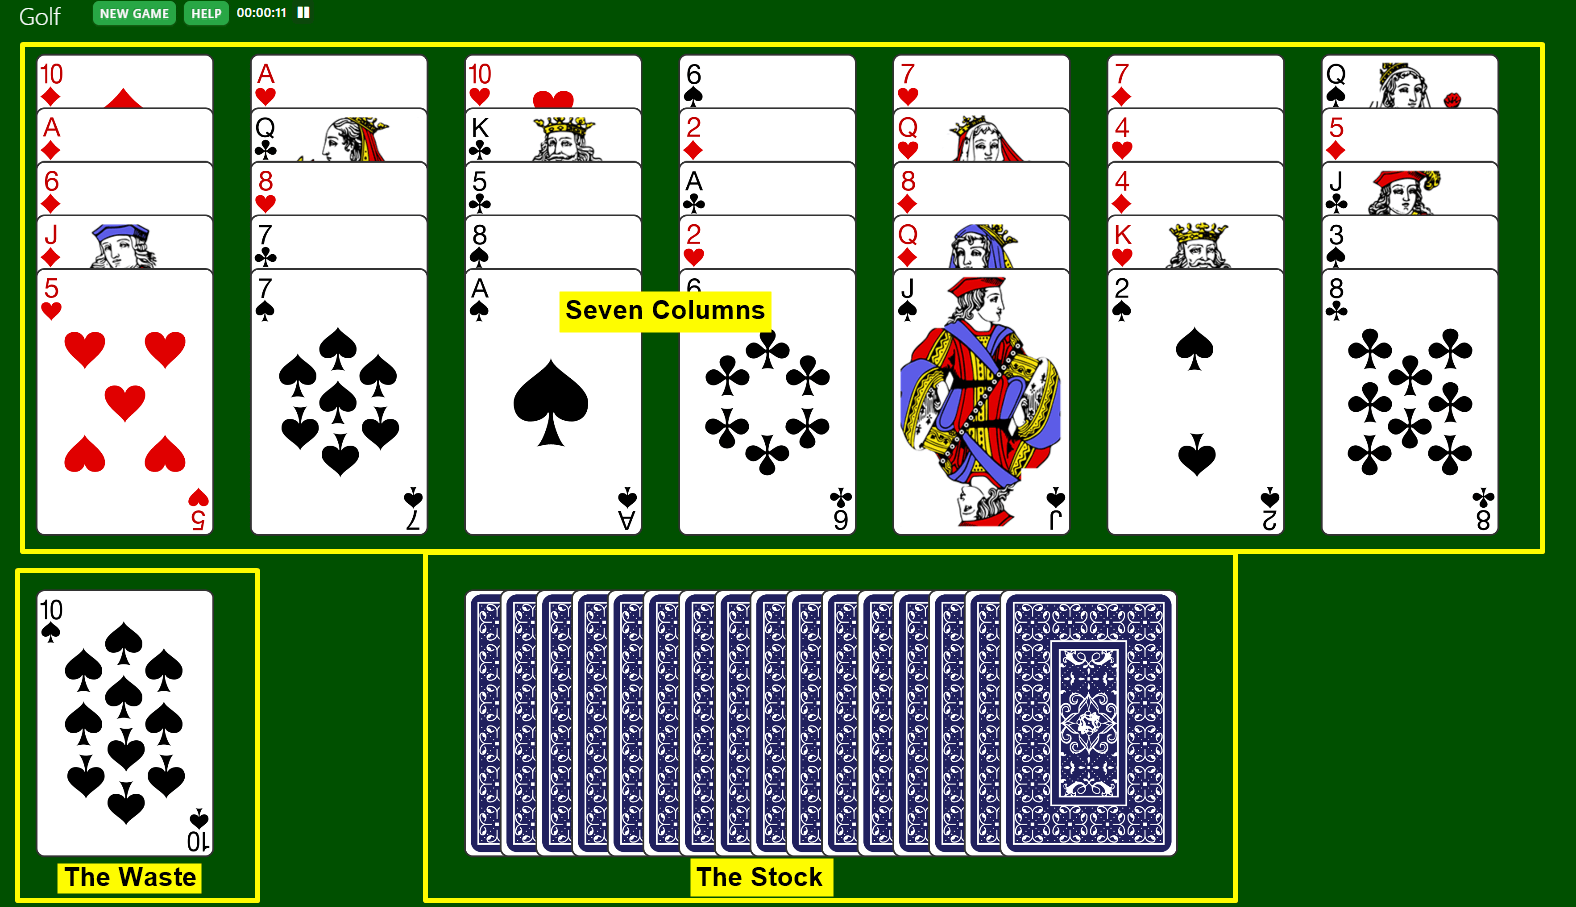 Solitaire Golf Printable Directions